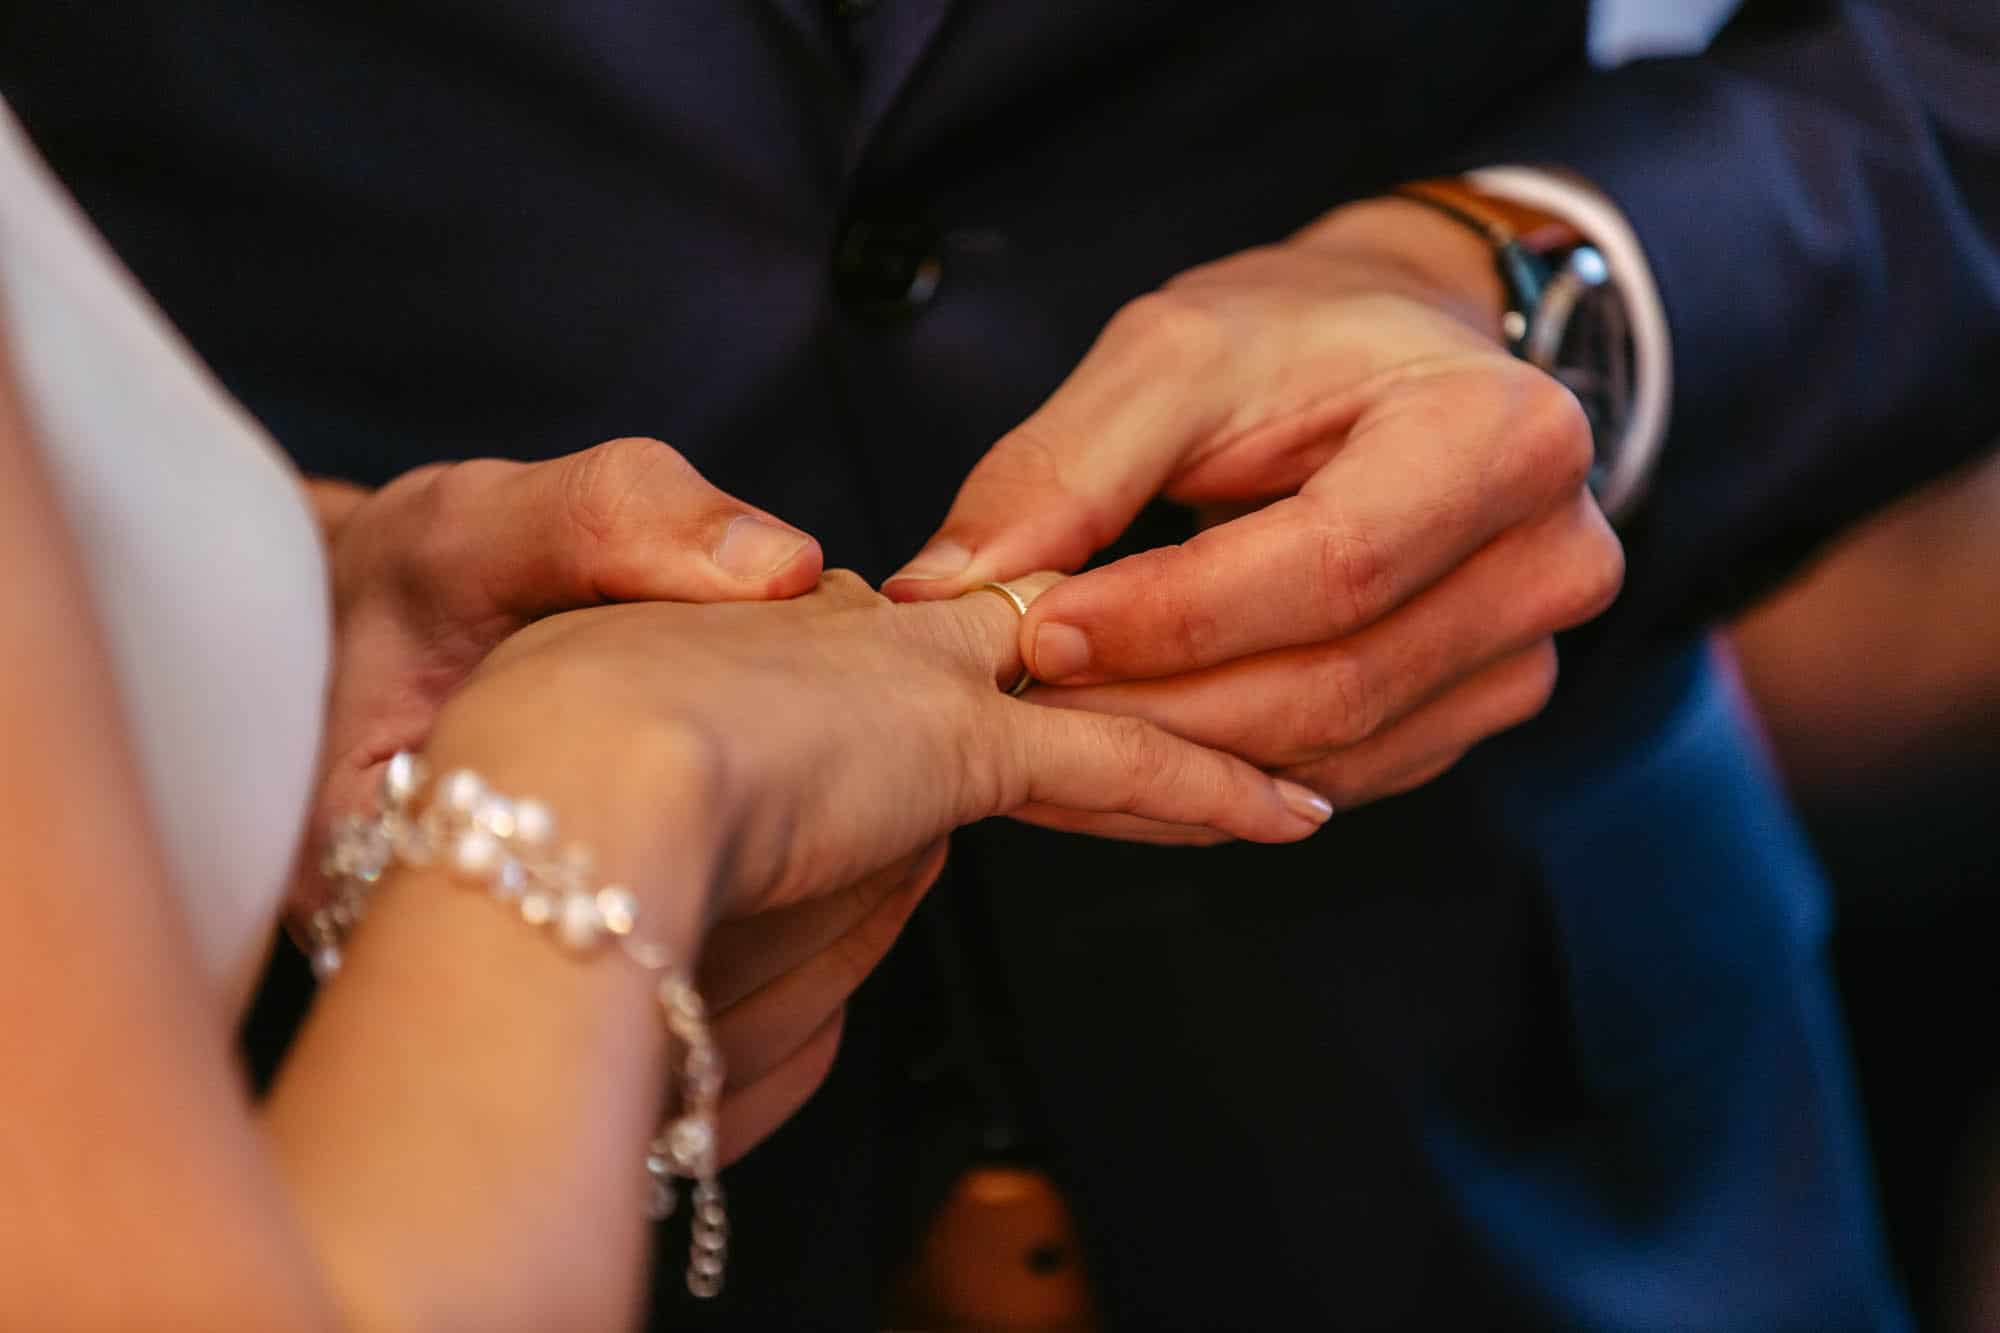 A man puts a wedding ring on a bride's hand.